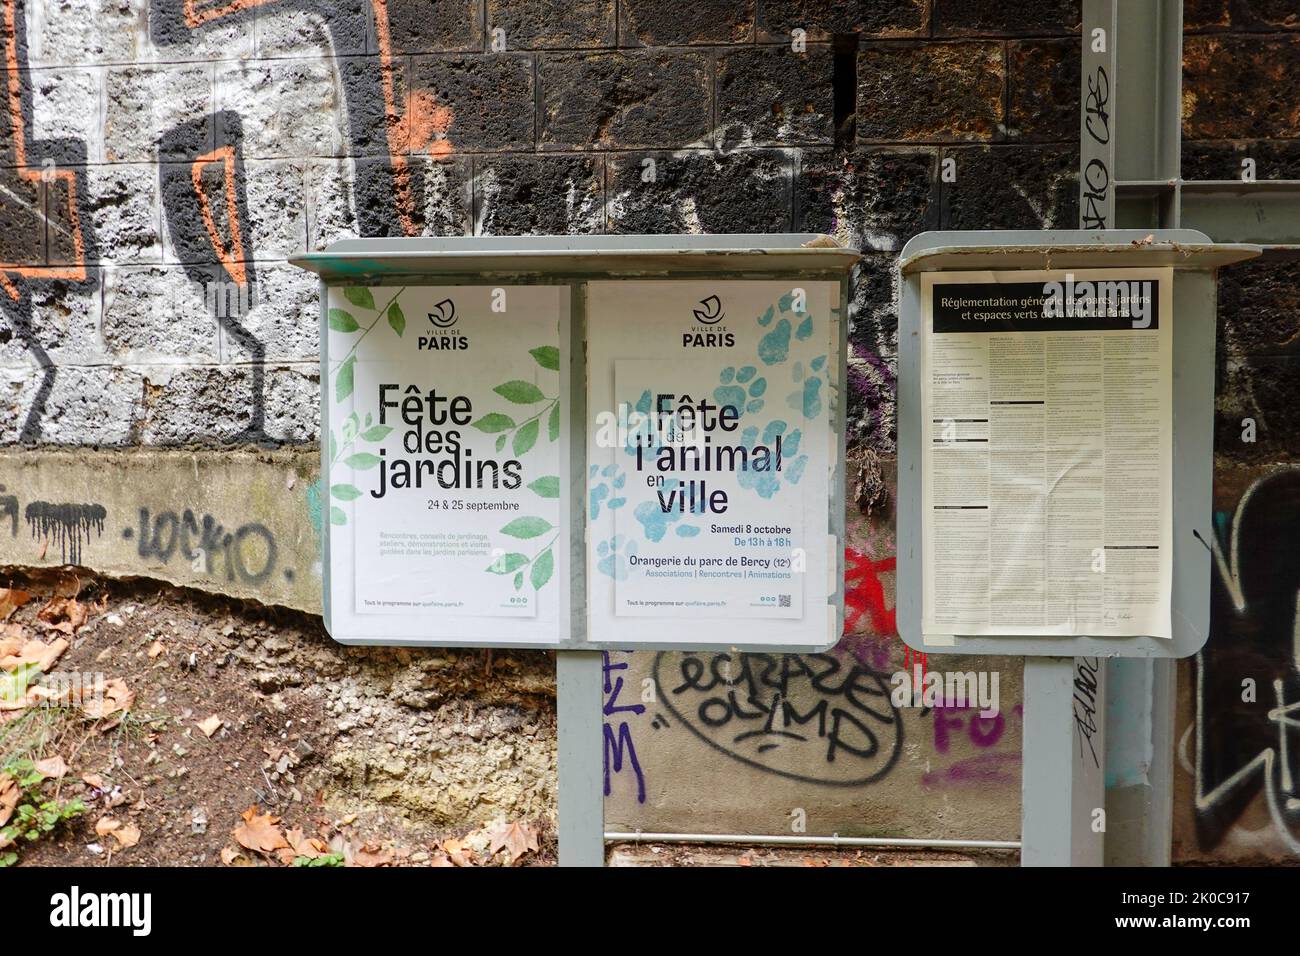 City of Paris, France signs, posted in a petite censure park, welcoming people to celebrate the gardens in September and animals in October. Stock Photo